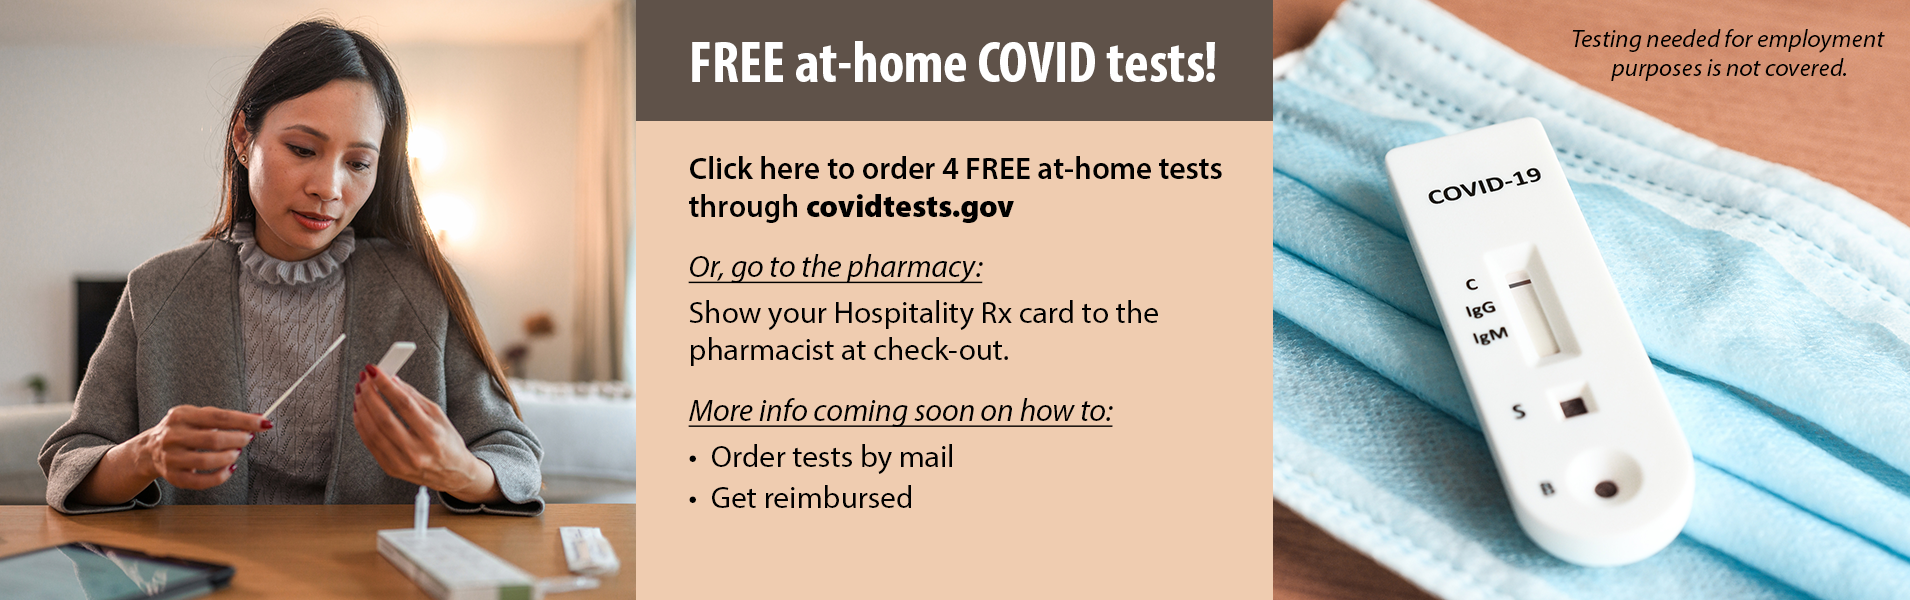 Free at-home COVID Tests